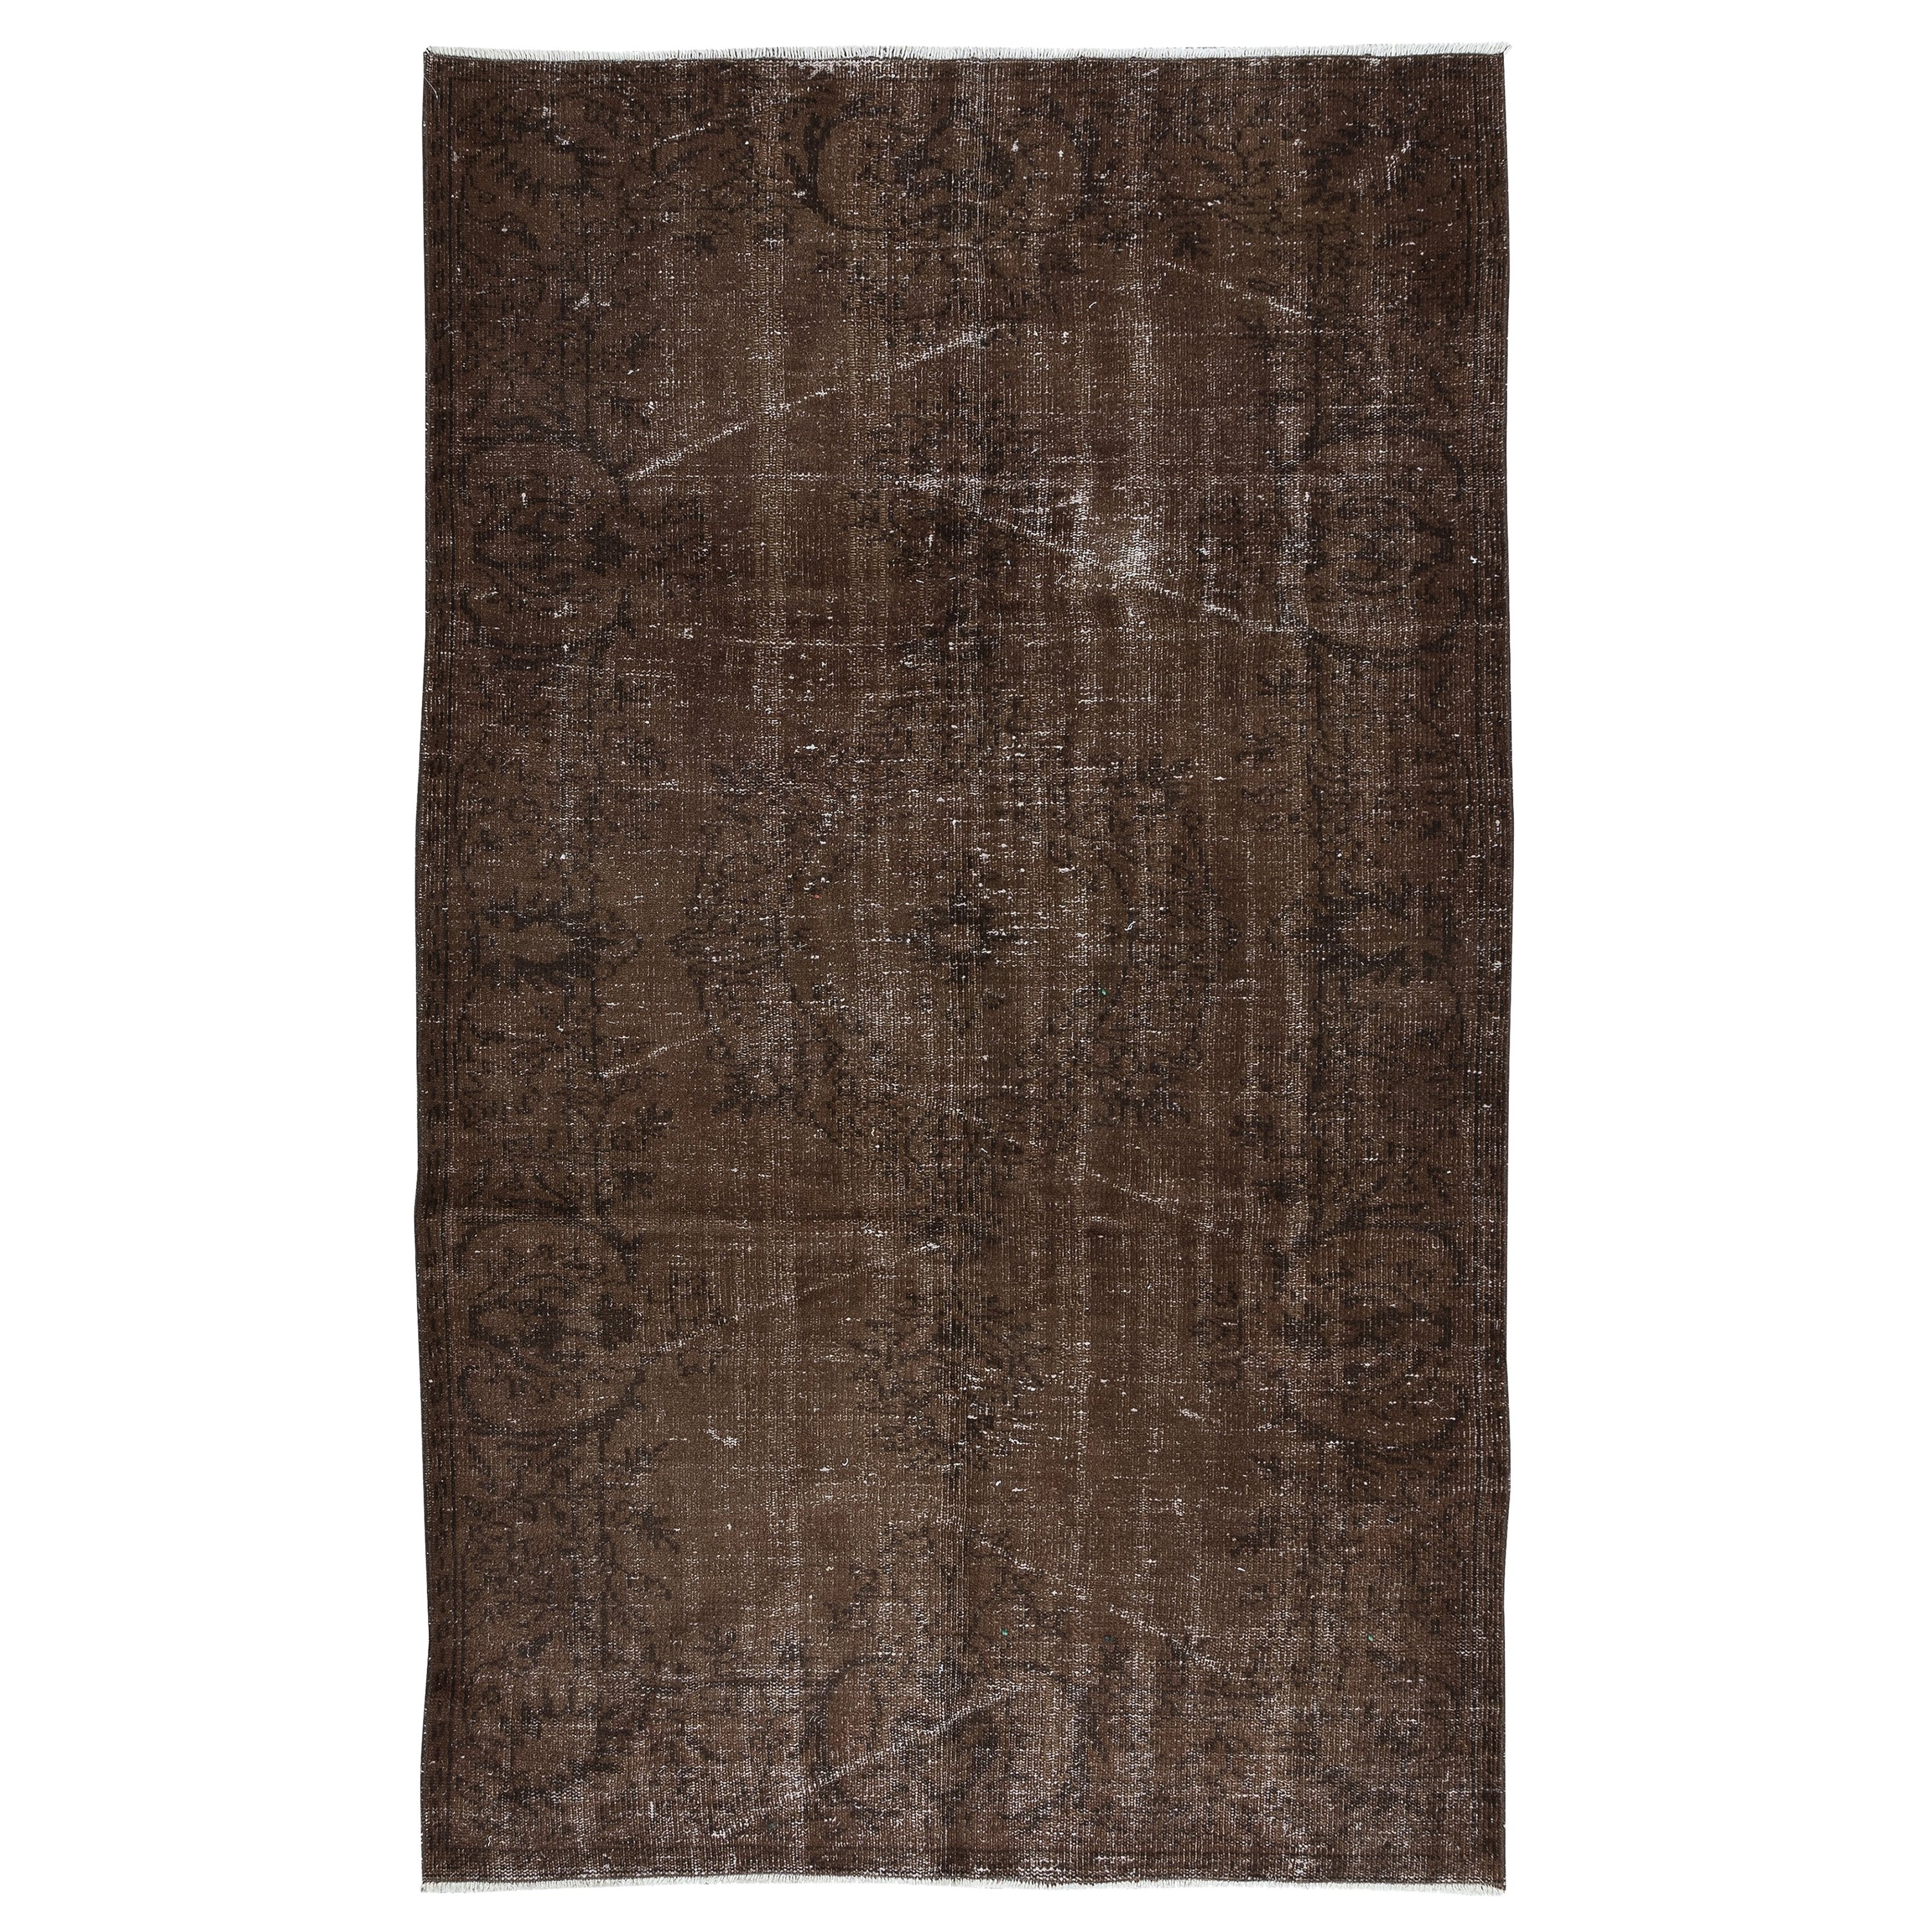 4.8x8 Ft Brown Distressed Look Handmade Rug, Modern Anatolian Shabby Chic Carpet For Sale